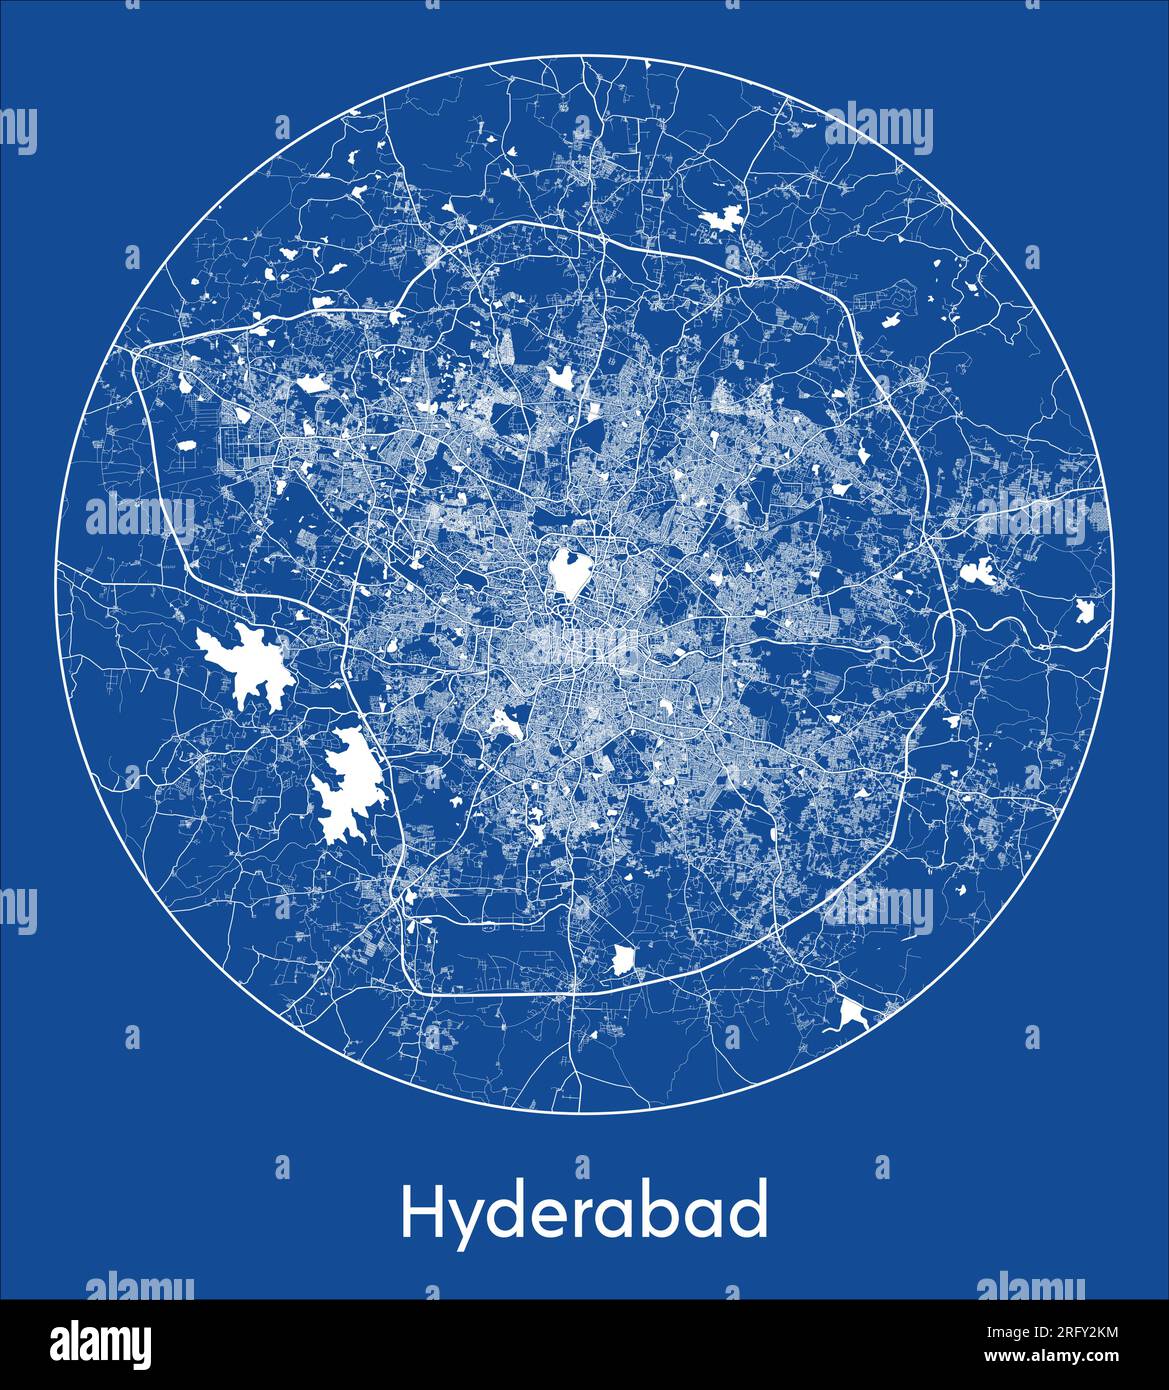 City Map Hyderabad India Asia blue print round Circle vector illustration Stock Vector